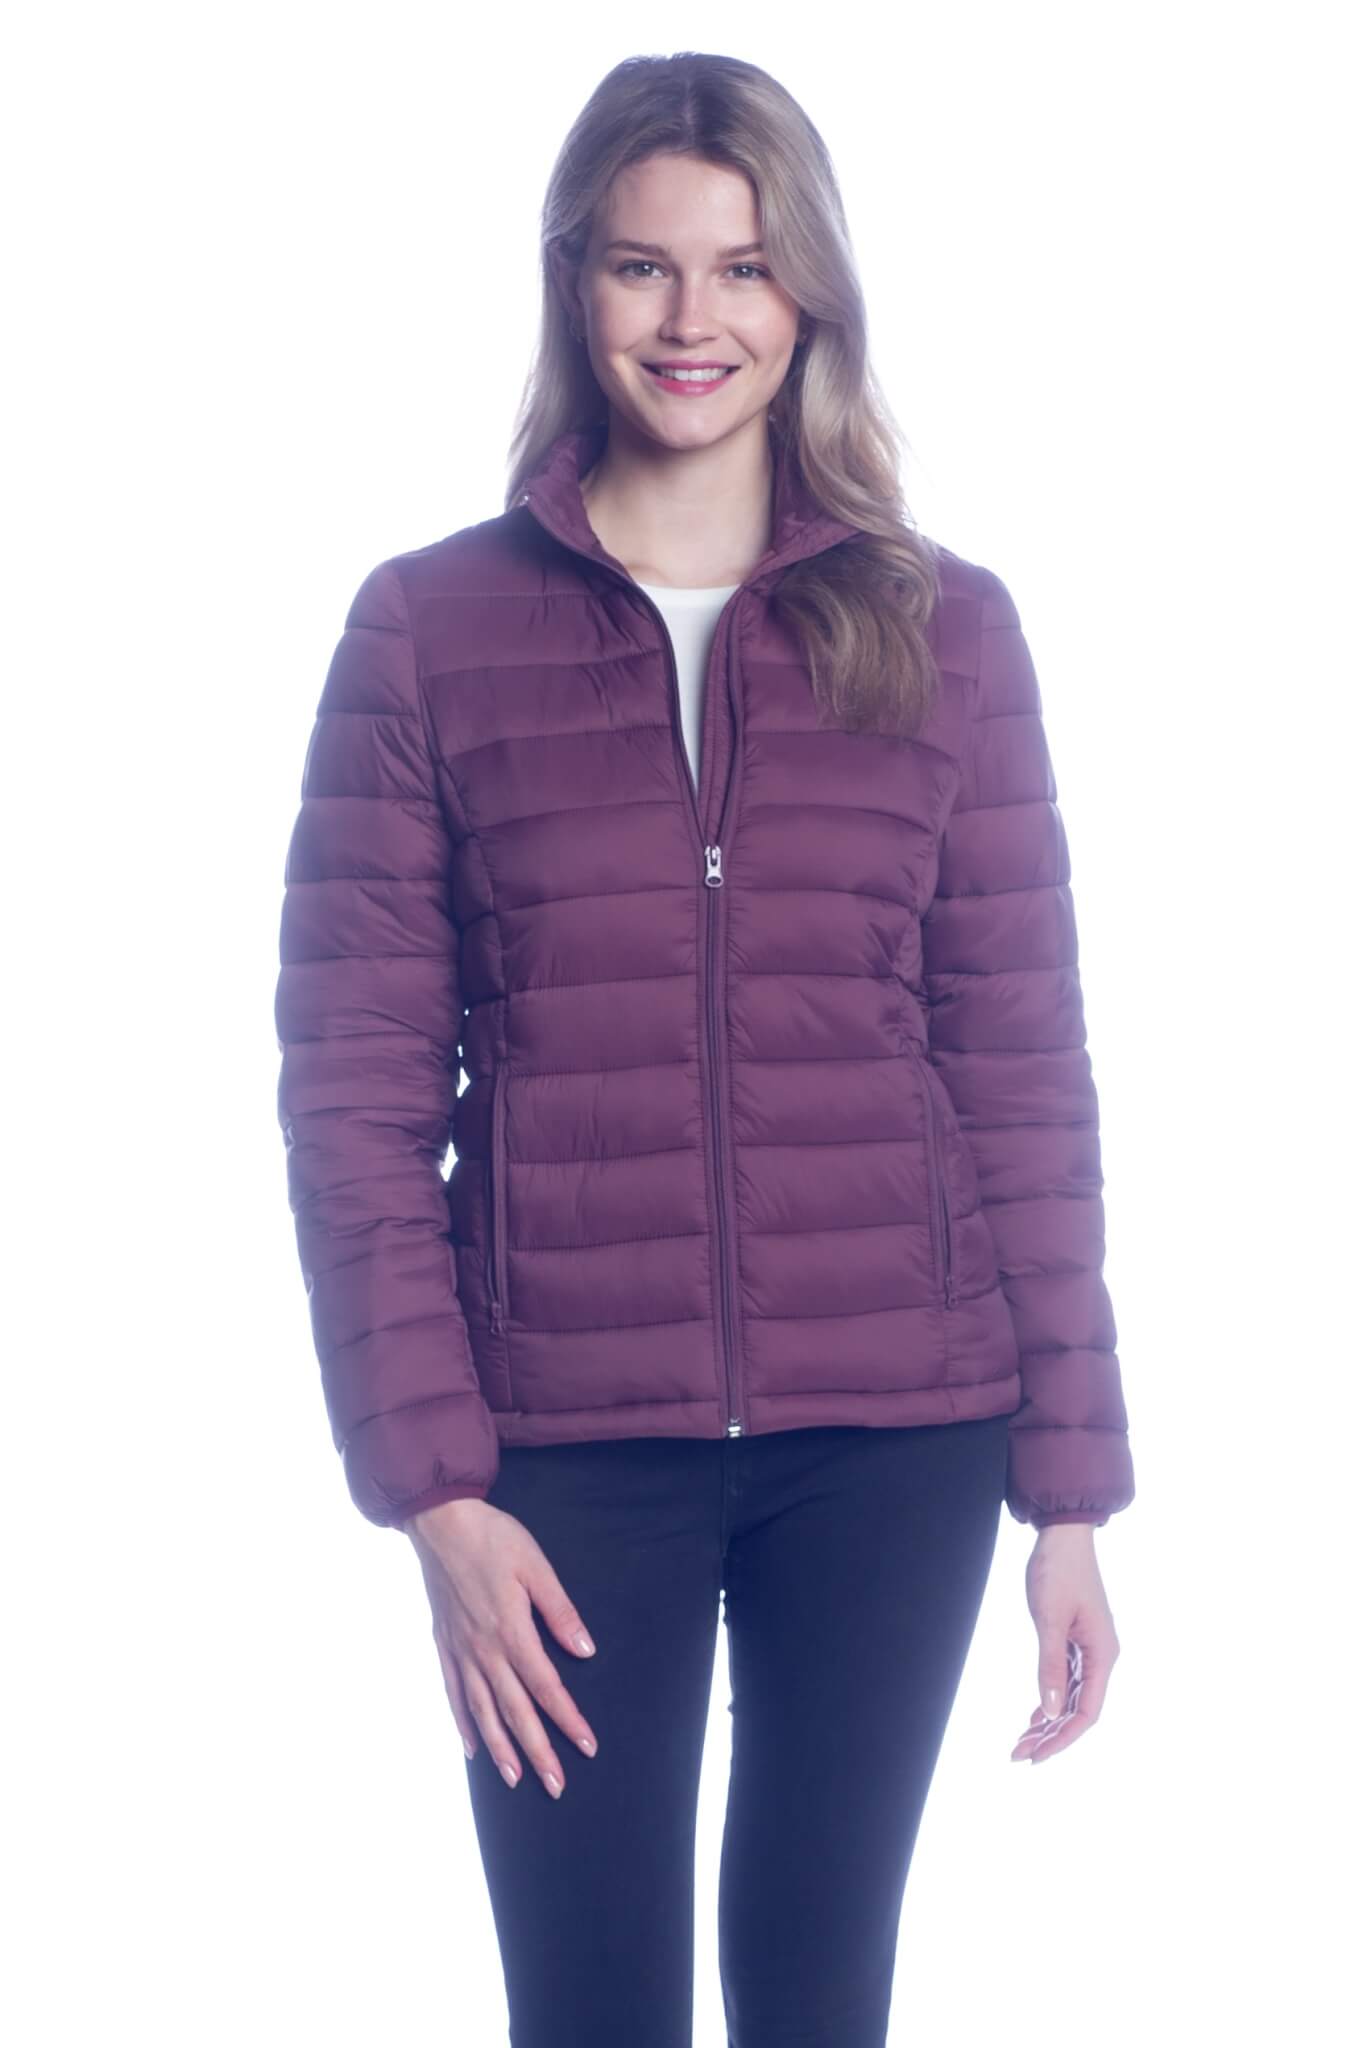 Padded Jacket with Zipper Pockets - DKR & Company Apparel / Clothes Out ...